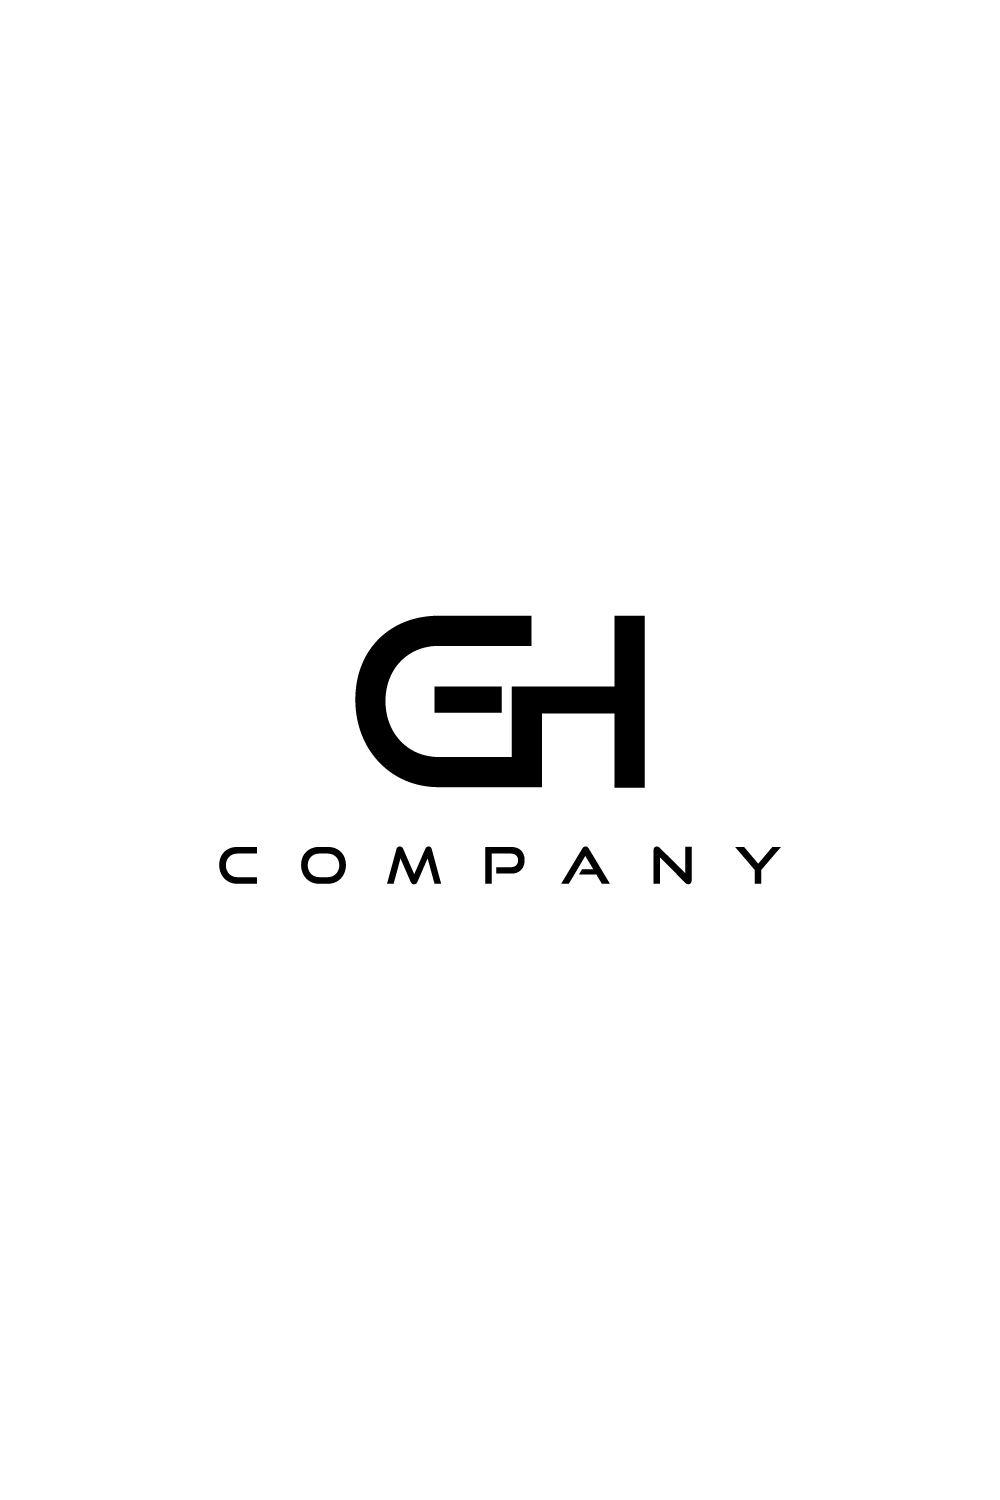 GH letter mark logo with a modern look pinterest preview image.